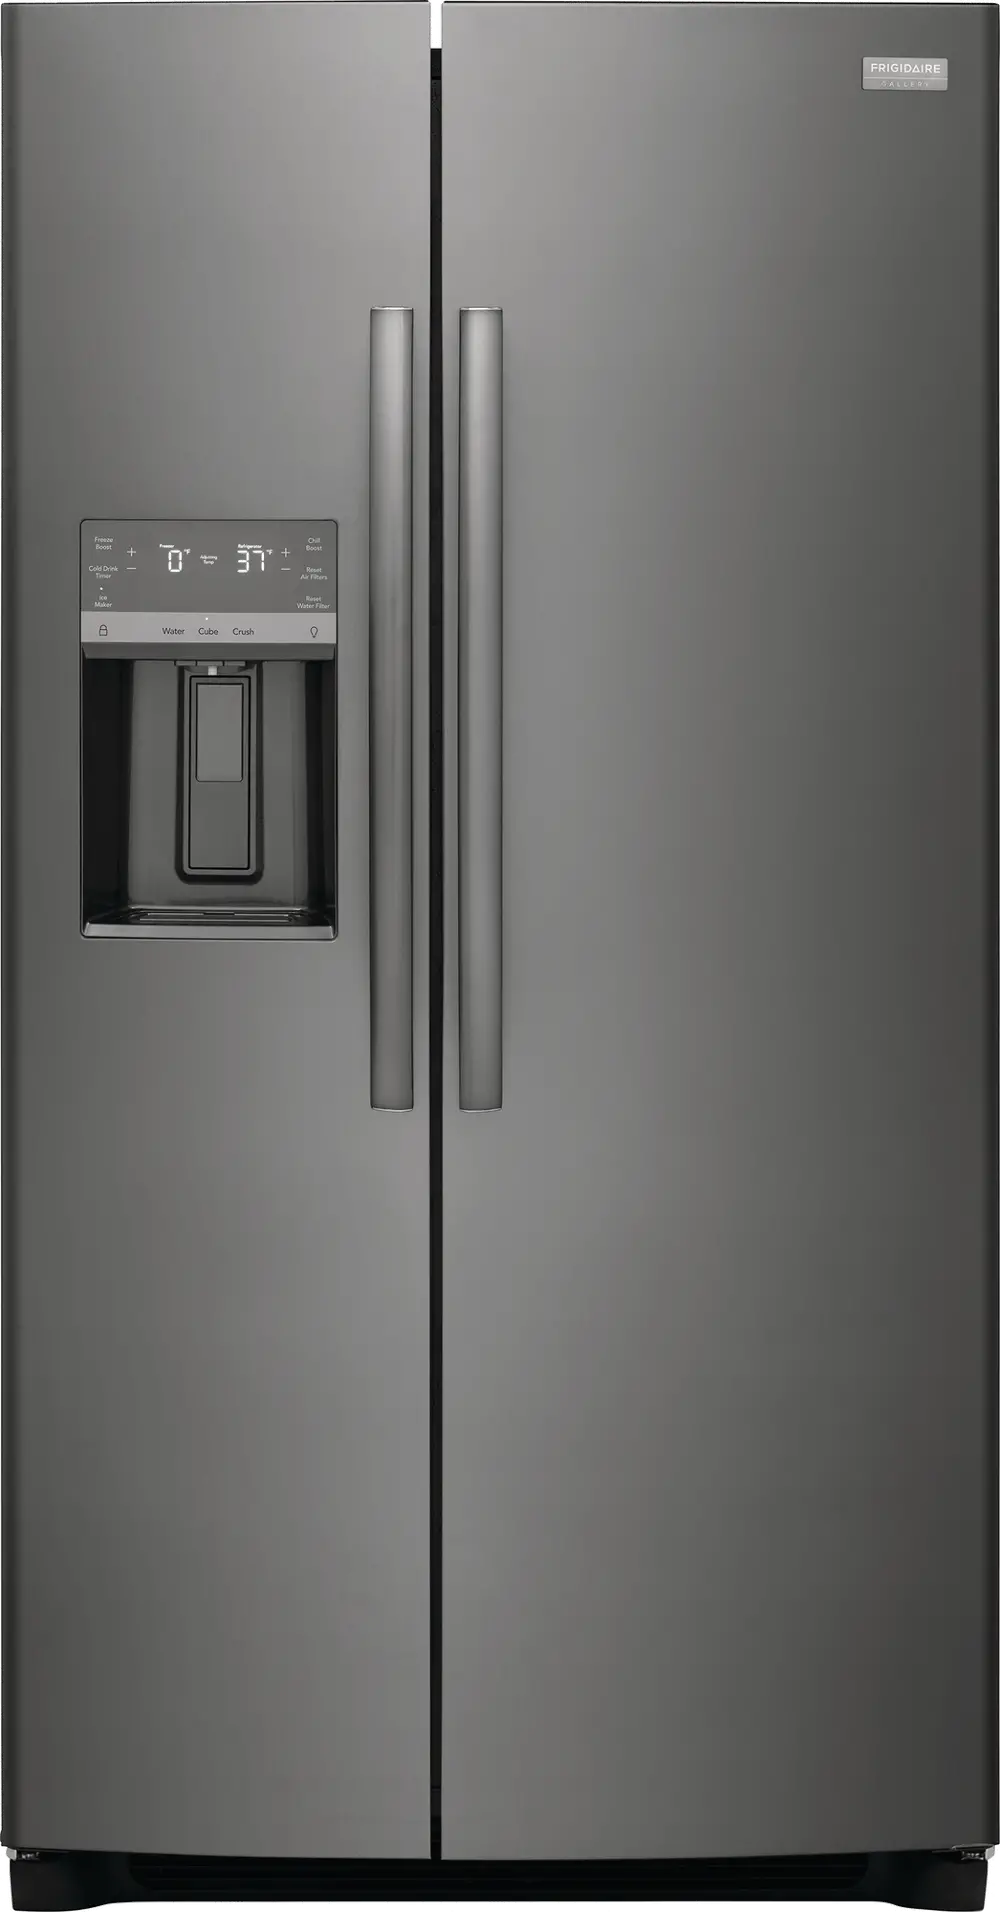 GRSC2352AD Frigidaire Gallery 22.3 cu ft Side by Side Refrigerator - Counter Depth Black Stainless Steel-1